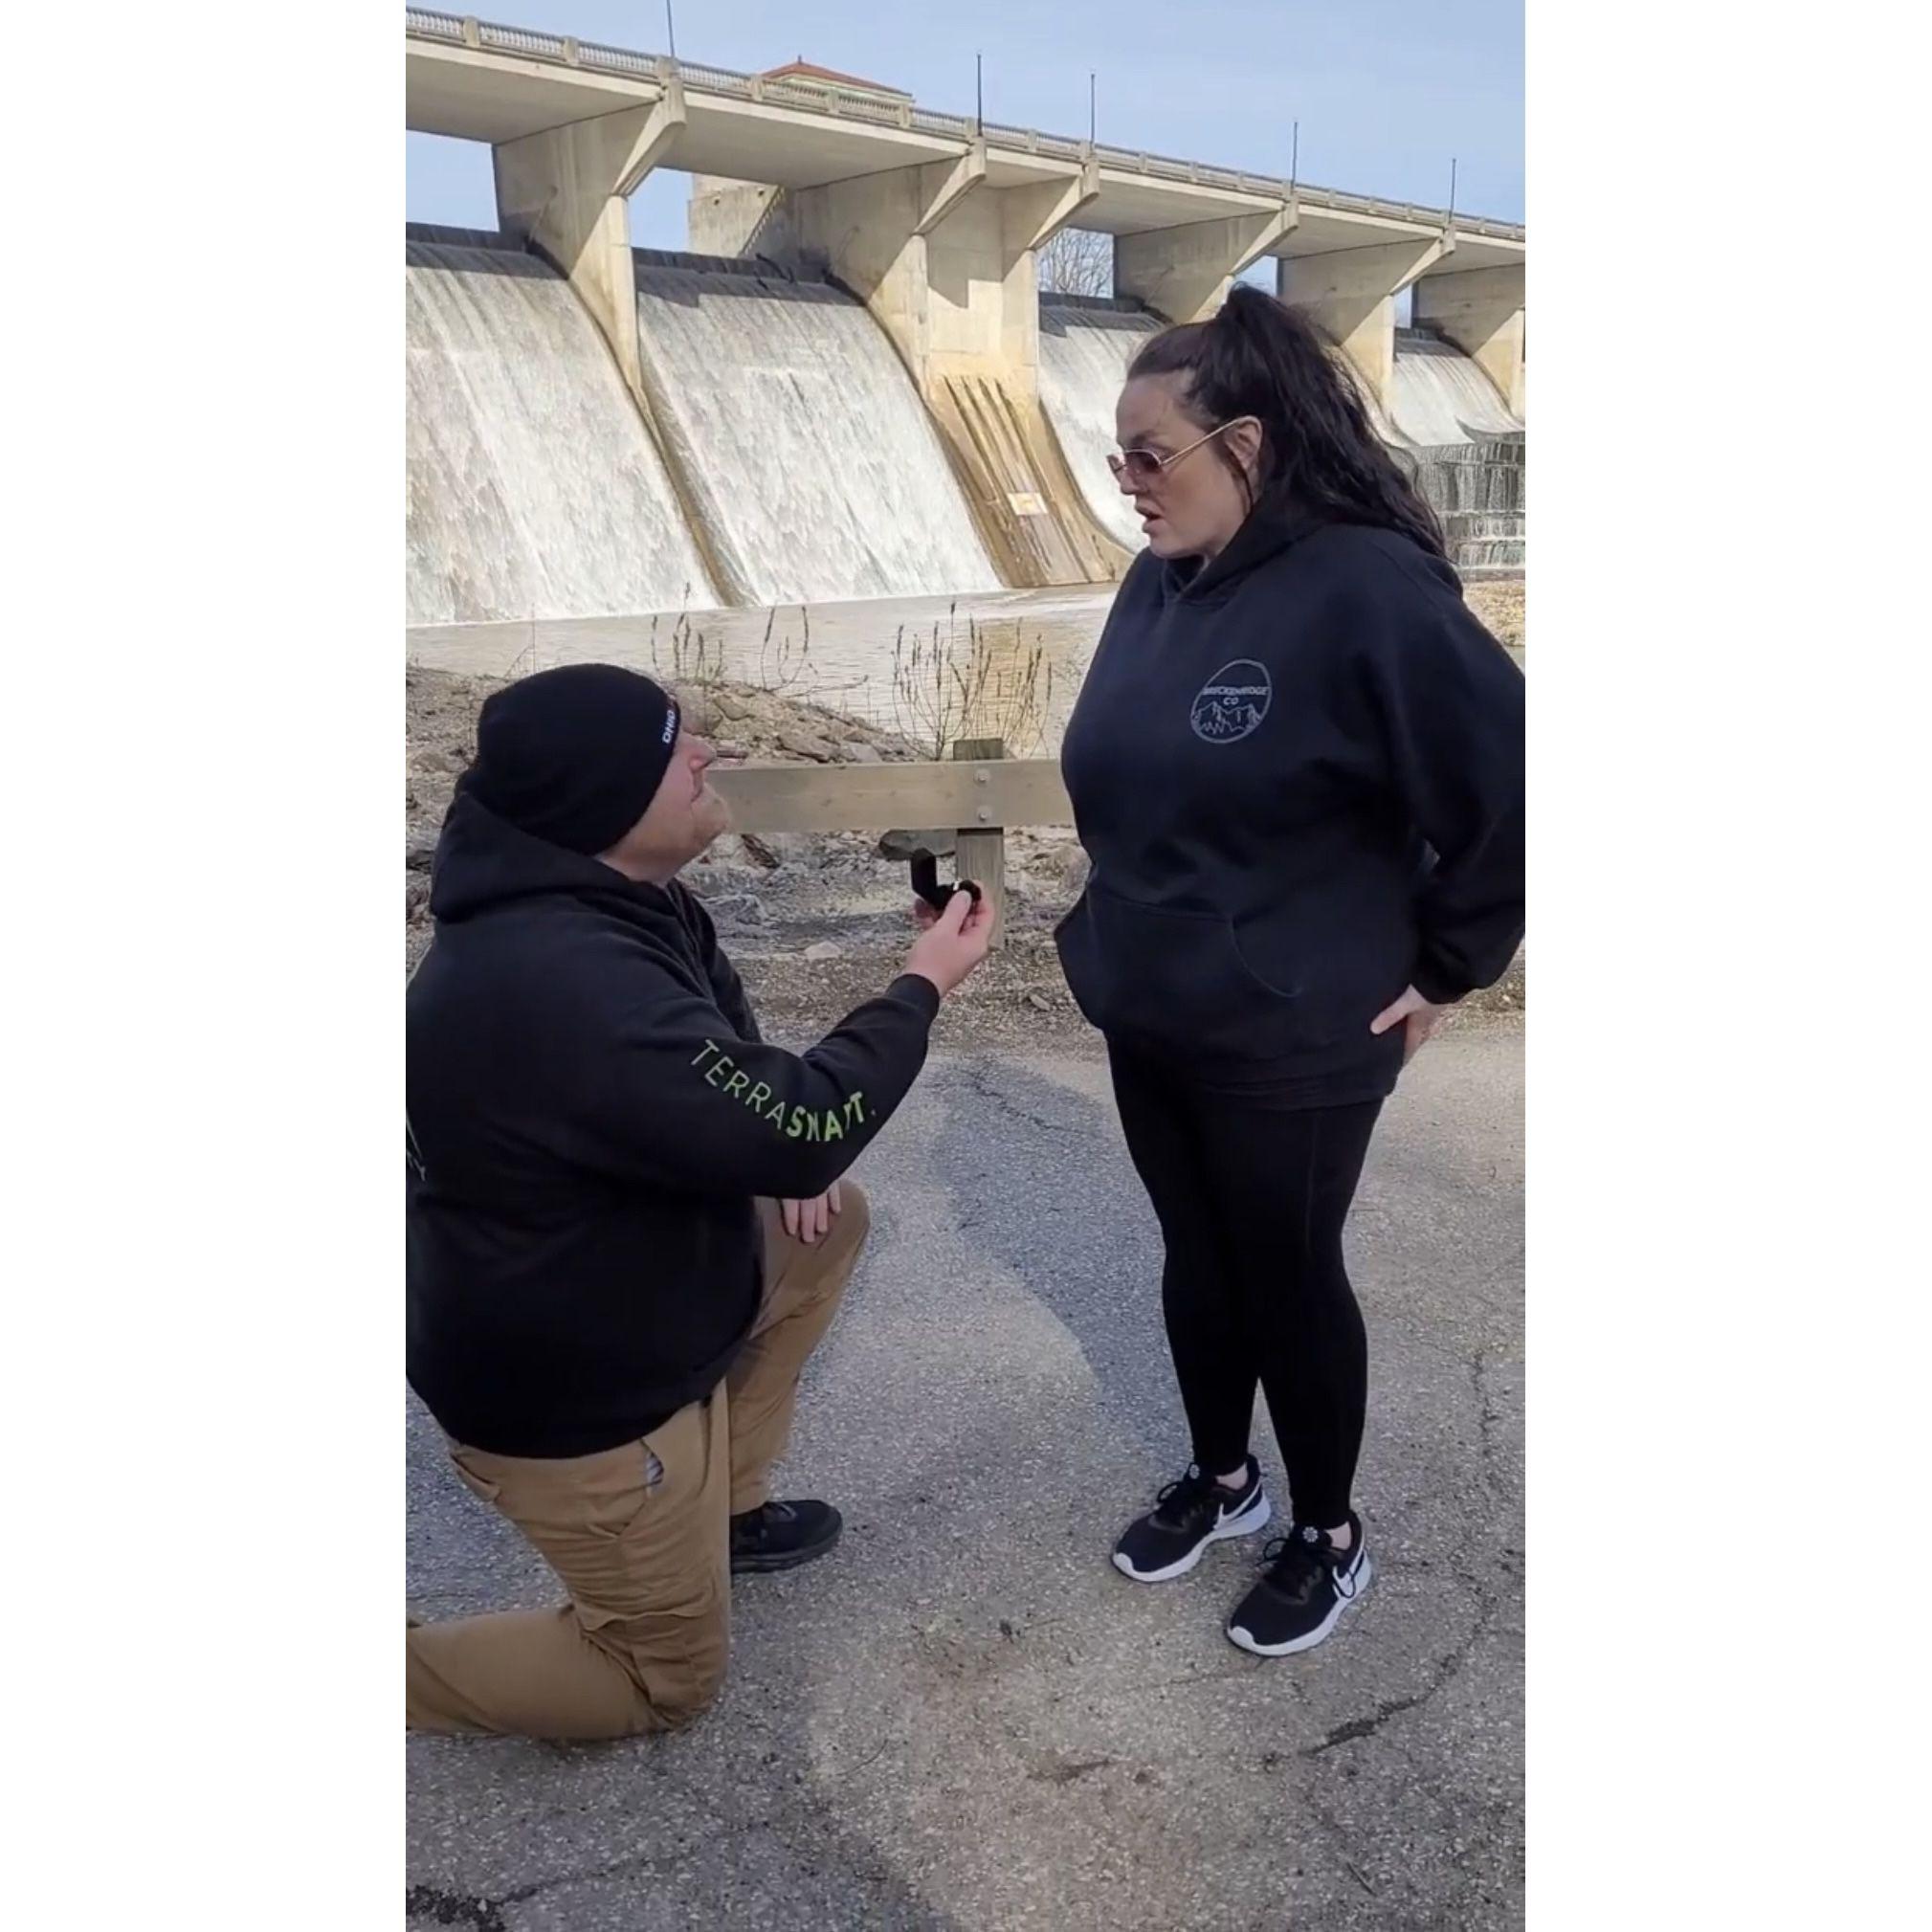 The proposal! Here's the link to watch the video:  https://youtube.com/shorts/KUNnjQO1U3A?si=5m942gswqP-erDR2